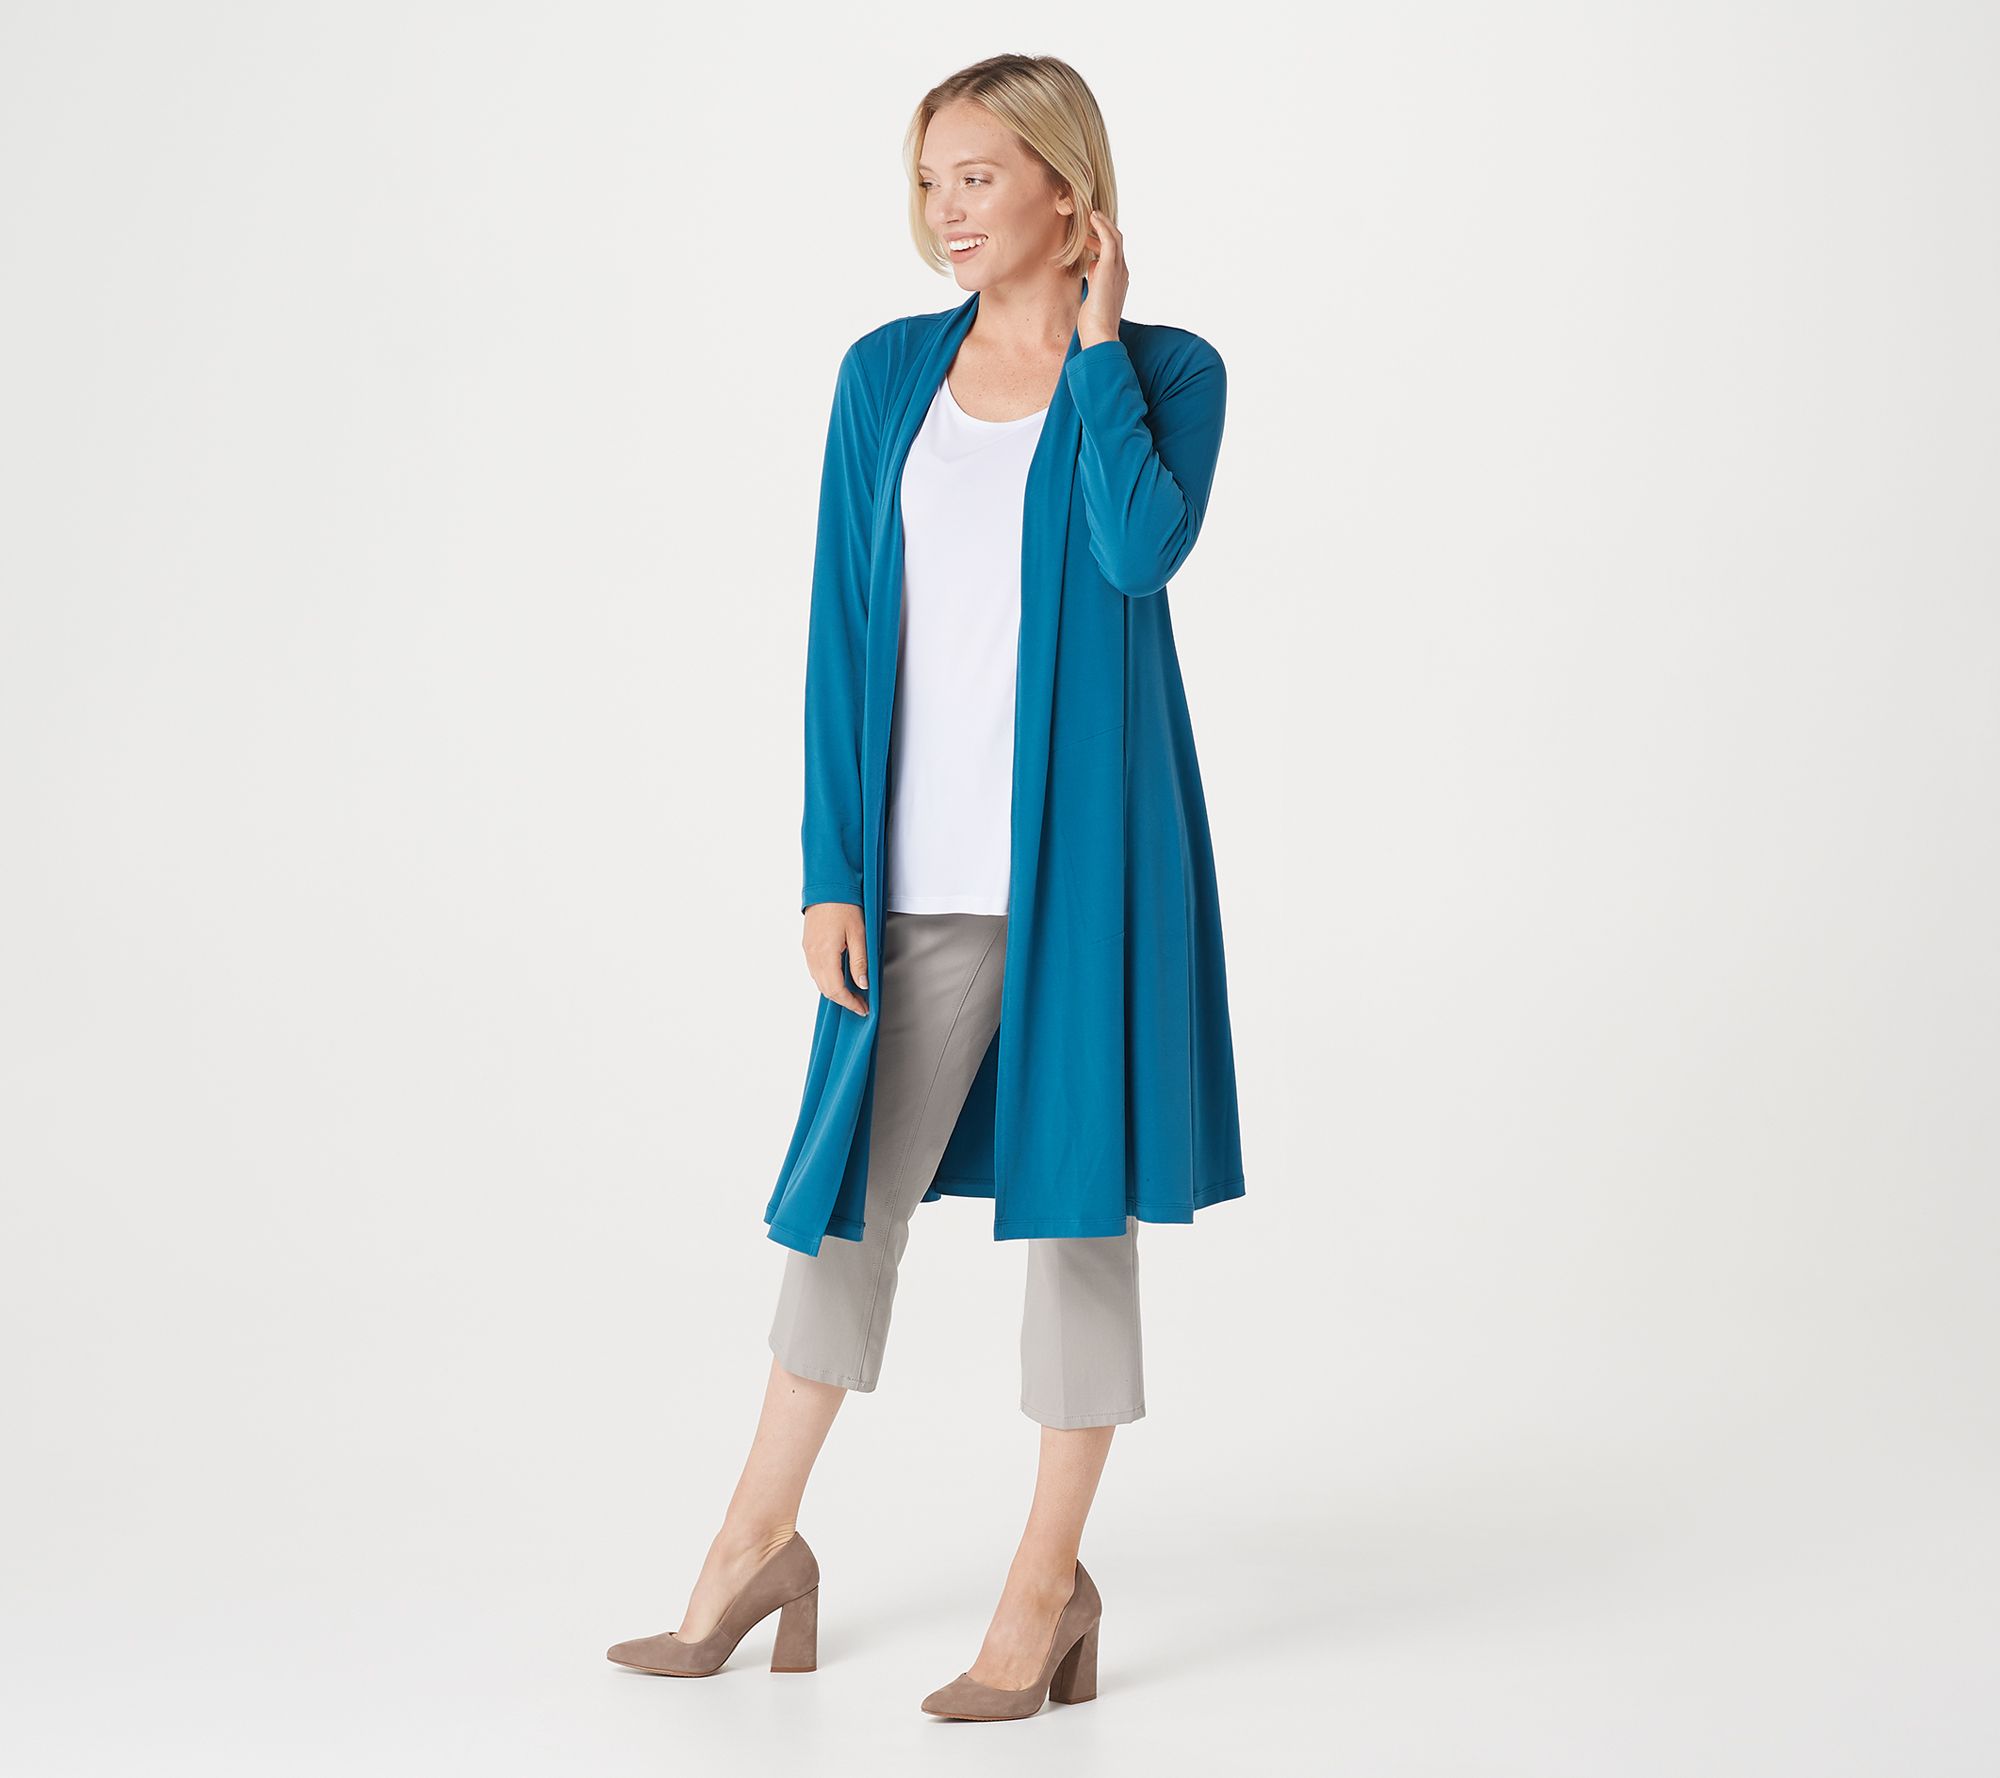 Every Day by Susan Graver Petite Liquid Knit Duster Cardigan - QVC.com